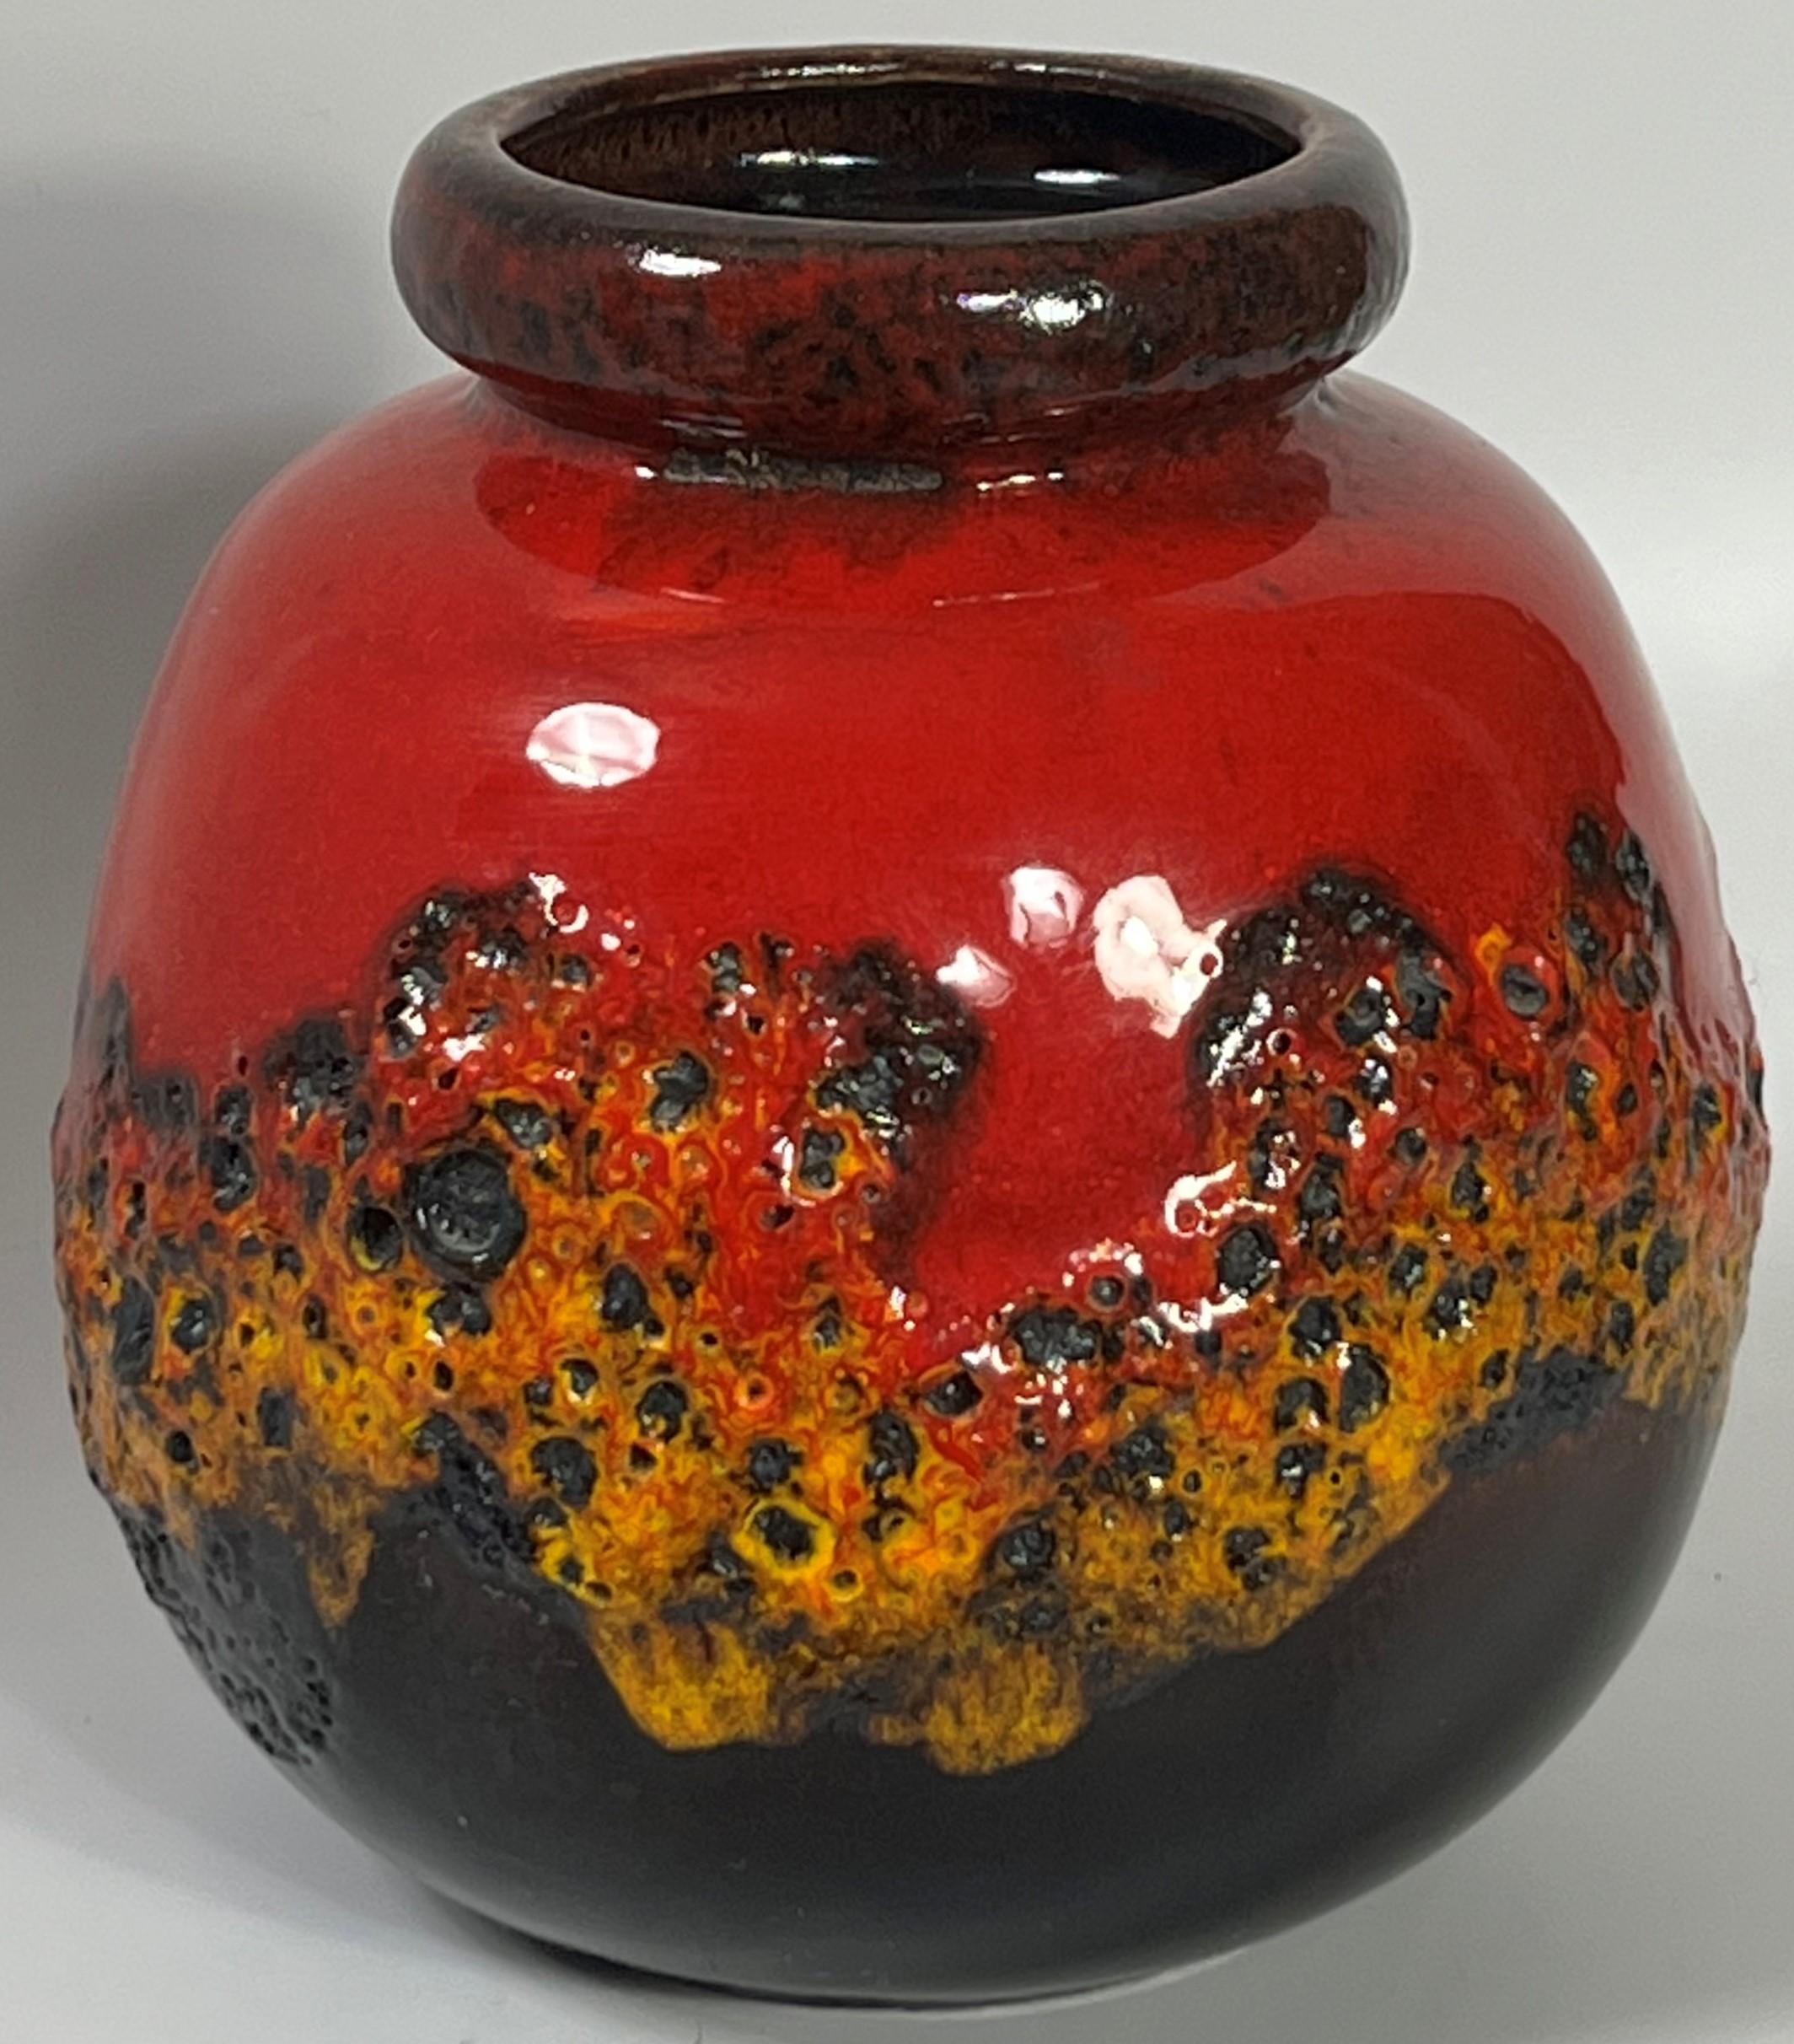 Simply gorgeous volcanic orange red lava dripping and crawling of a dark brown glaze that fired to nearly mirror black coloration. The 284 19 form is proven a perfect vehicle for many of Scheurich's best glazes. Assembling a collection representing